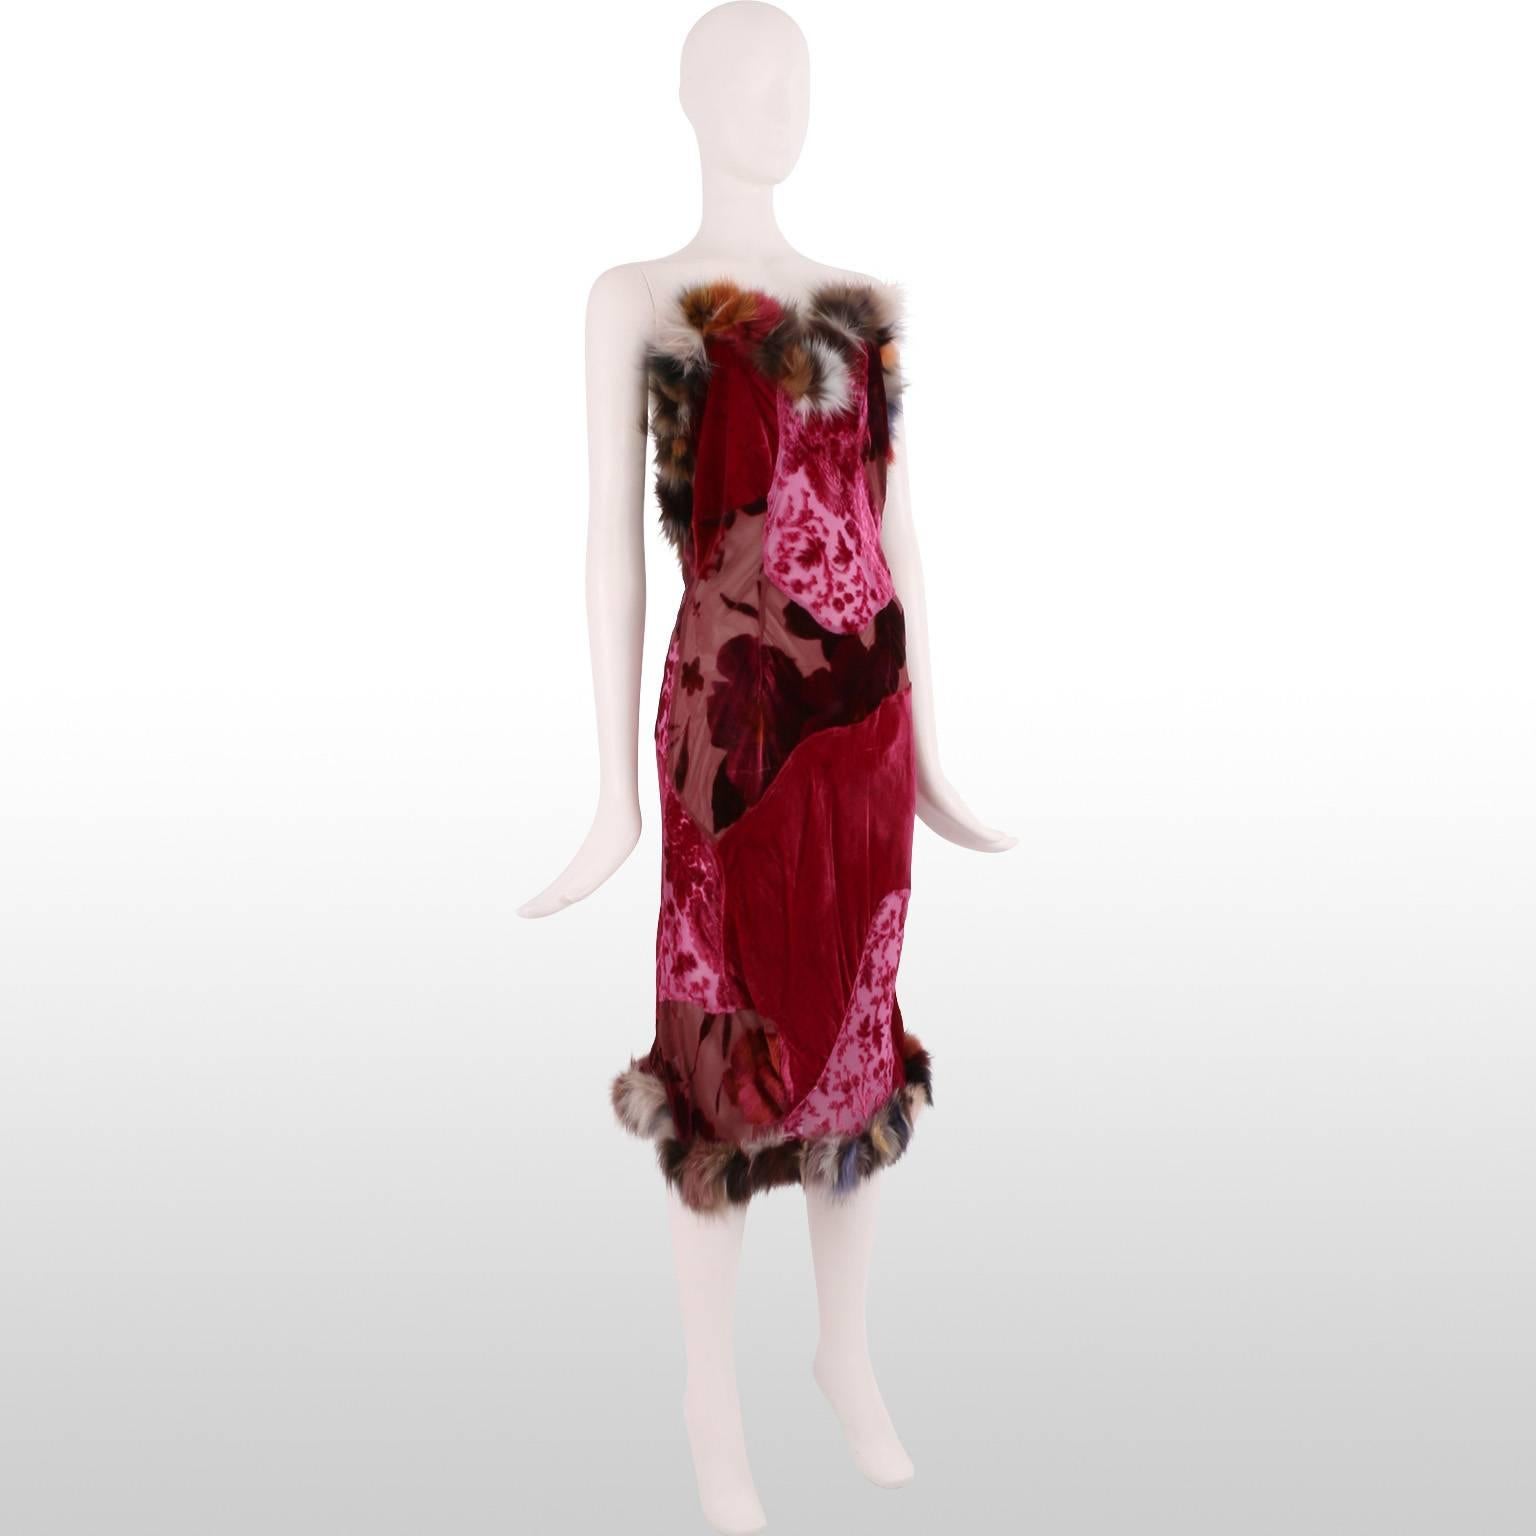 This slinky original Voyage velvet and silk patchwork dress, with its colourful rabbit fur trim detailing creates a statement look! The bold magenta colour of the dress contrasts beautifully with the striking colours of the furs with neutral tones